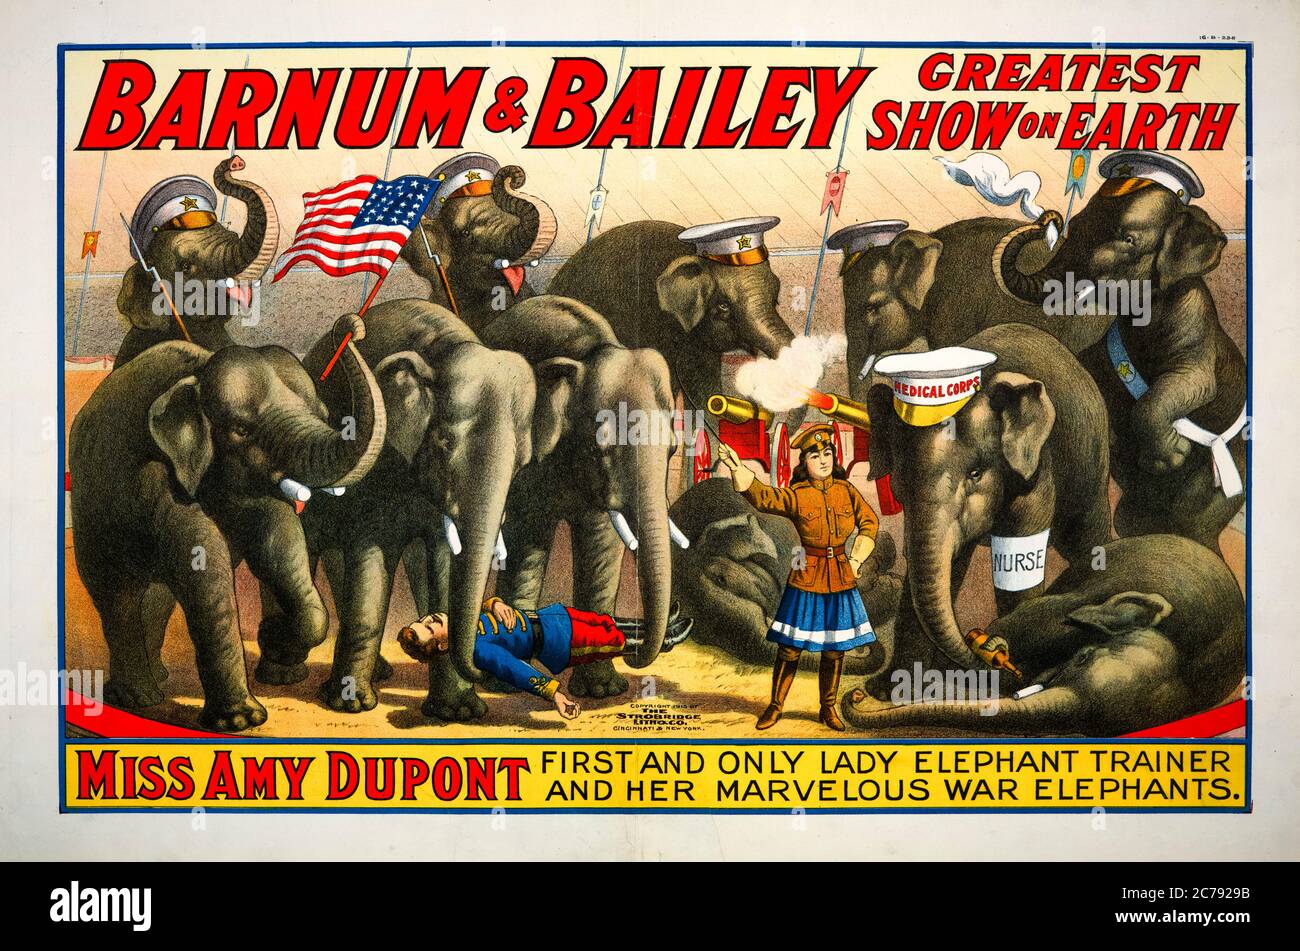 Barnum and Bailey, Greatest Show on Earth, circus poster, Miss Amy Dupont, first and only lady elephant trainer and her marvellous war elephants, poster, 1915 Stock Photo